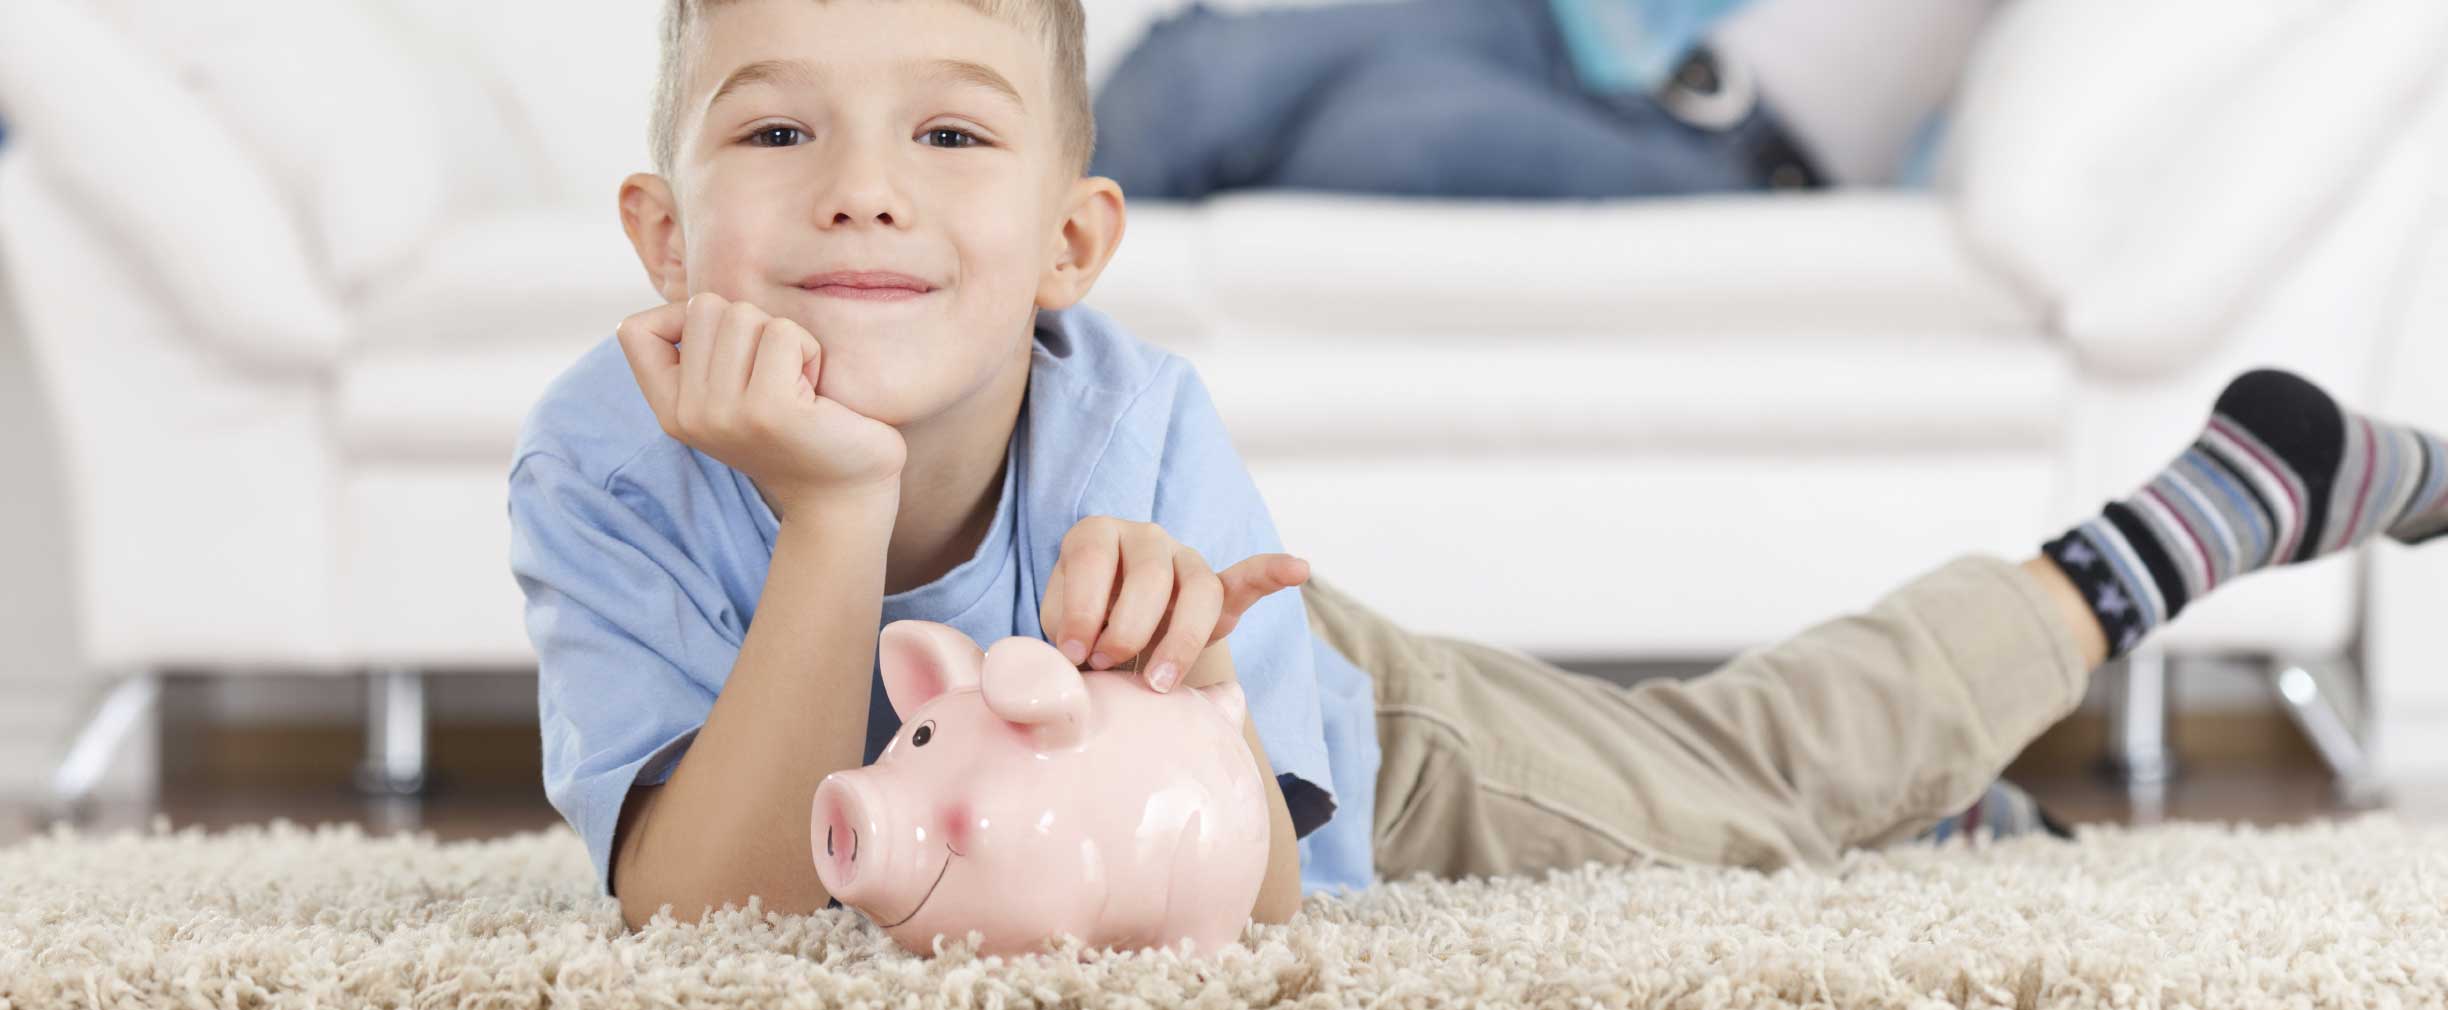 5 Creative Ways to Save for a Child's College Education